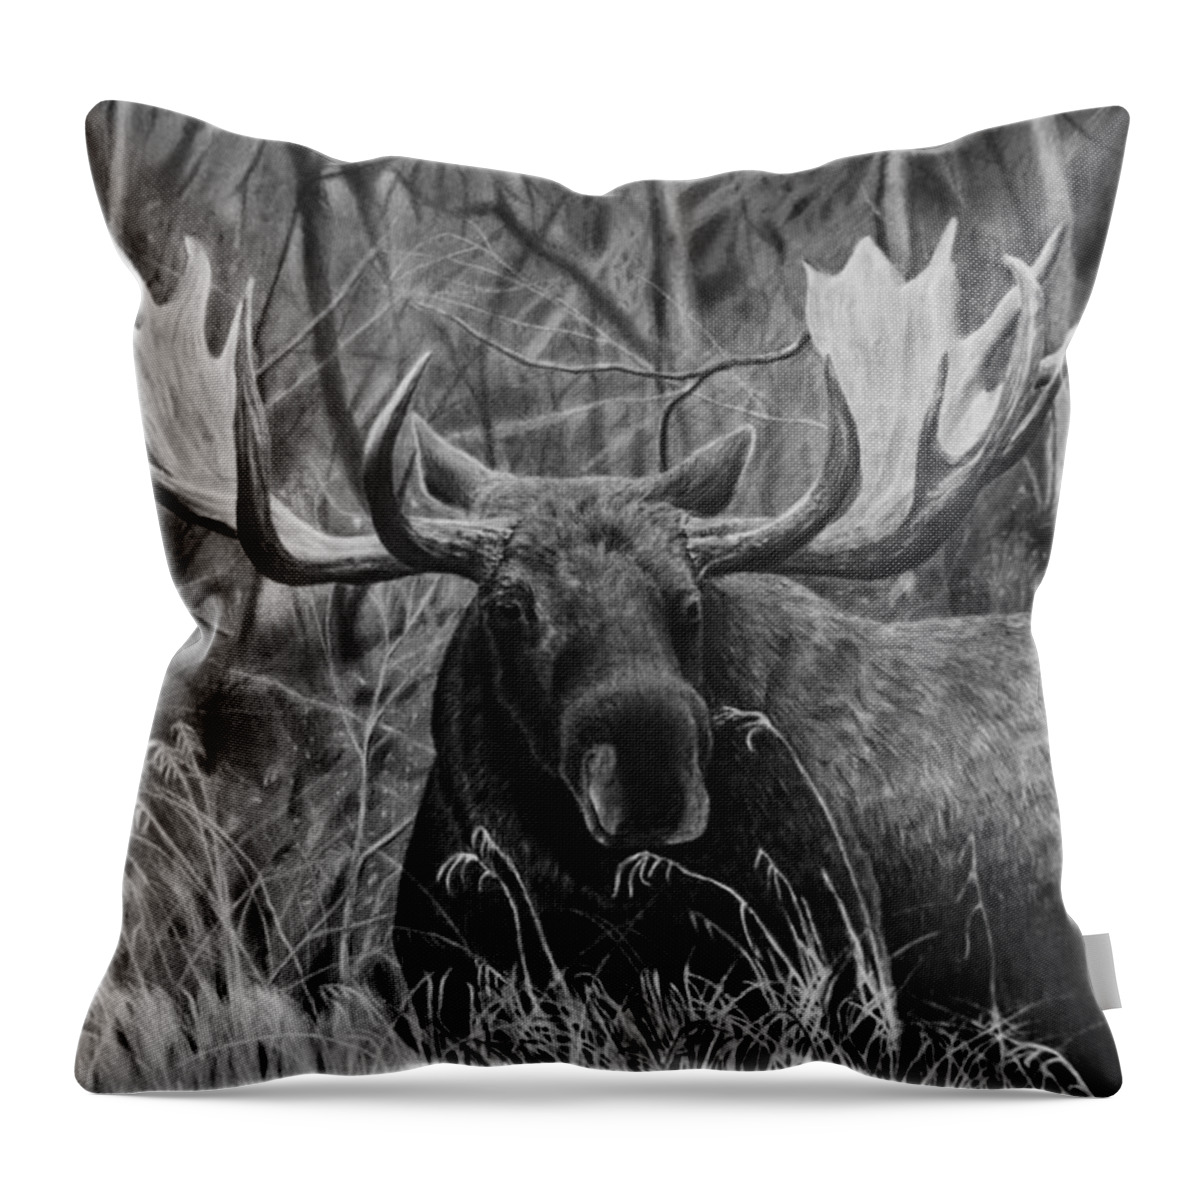 Moose Throw Pillow featuring the drawing Boreal by Greg Fox